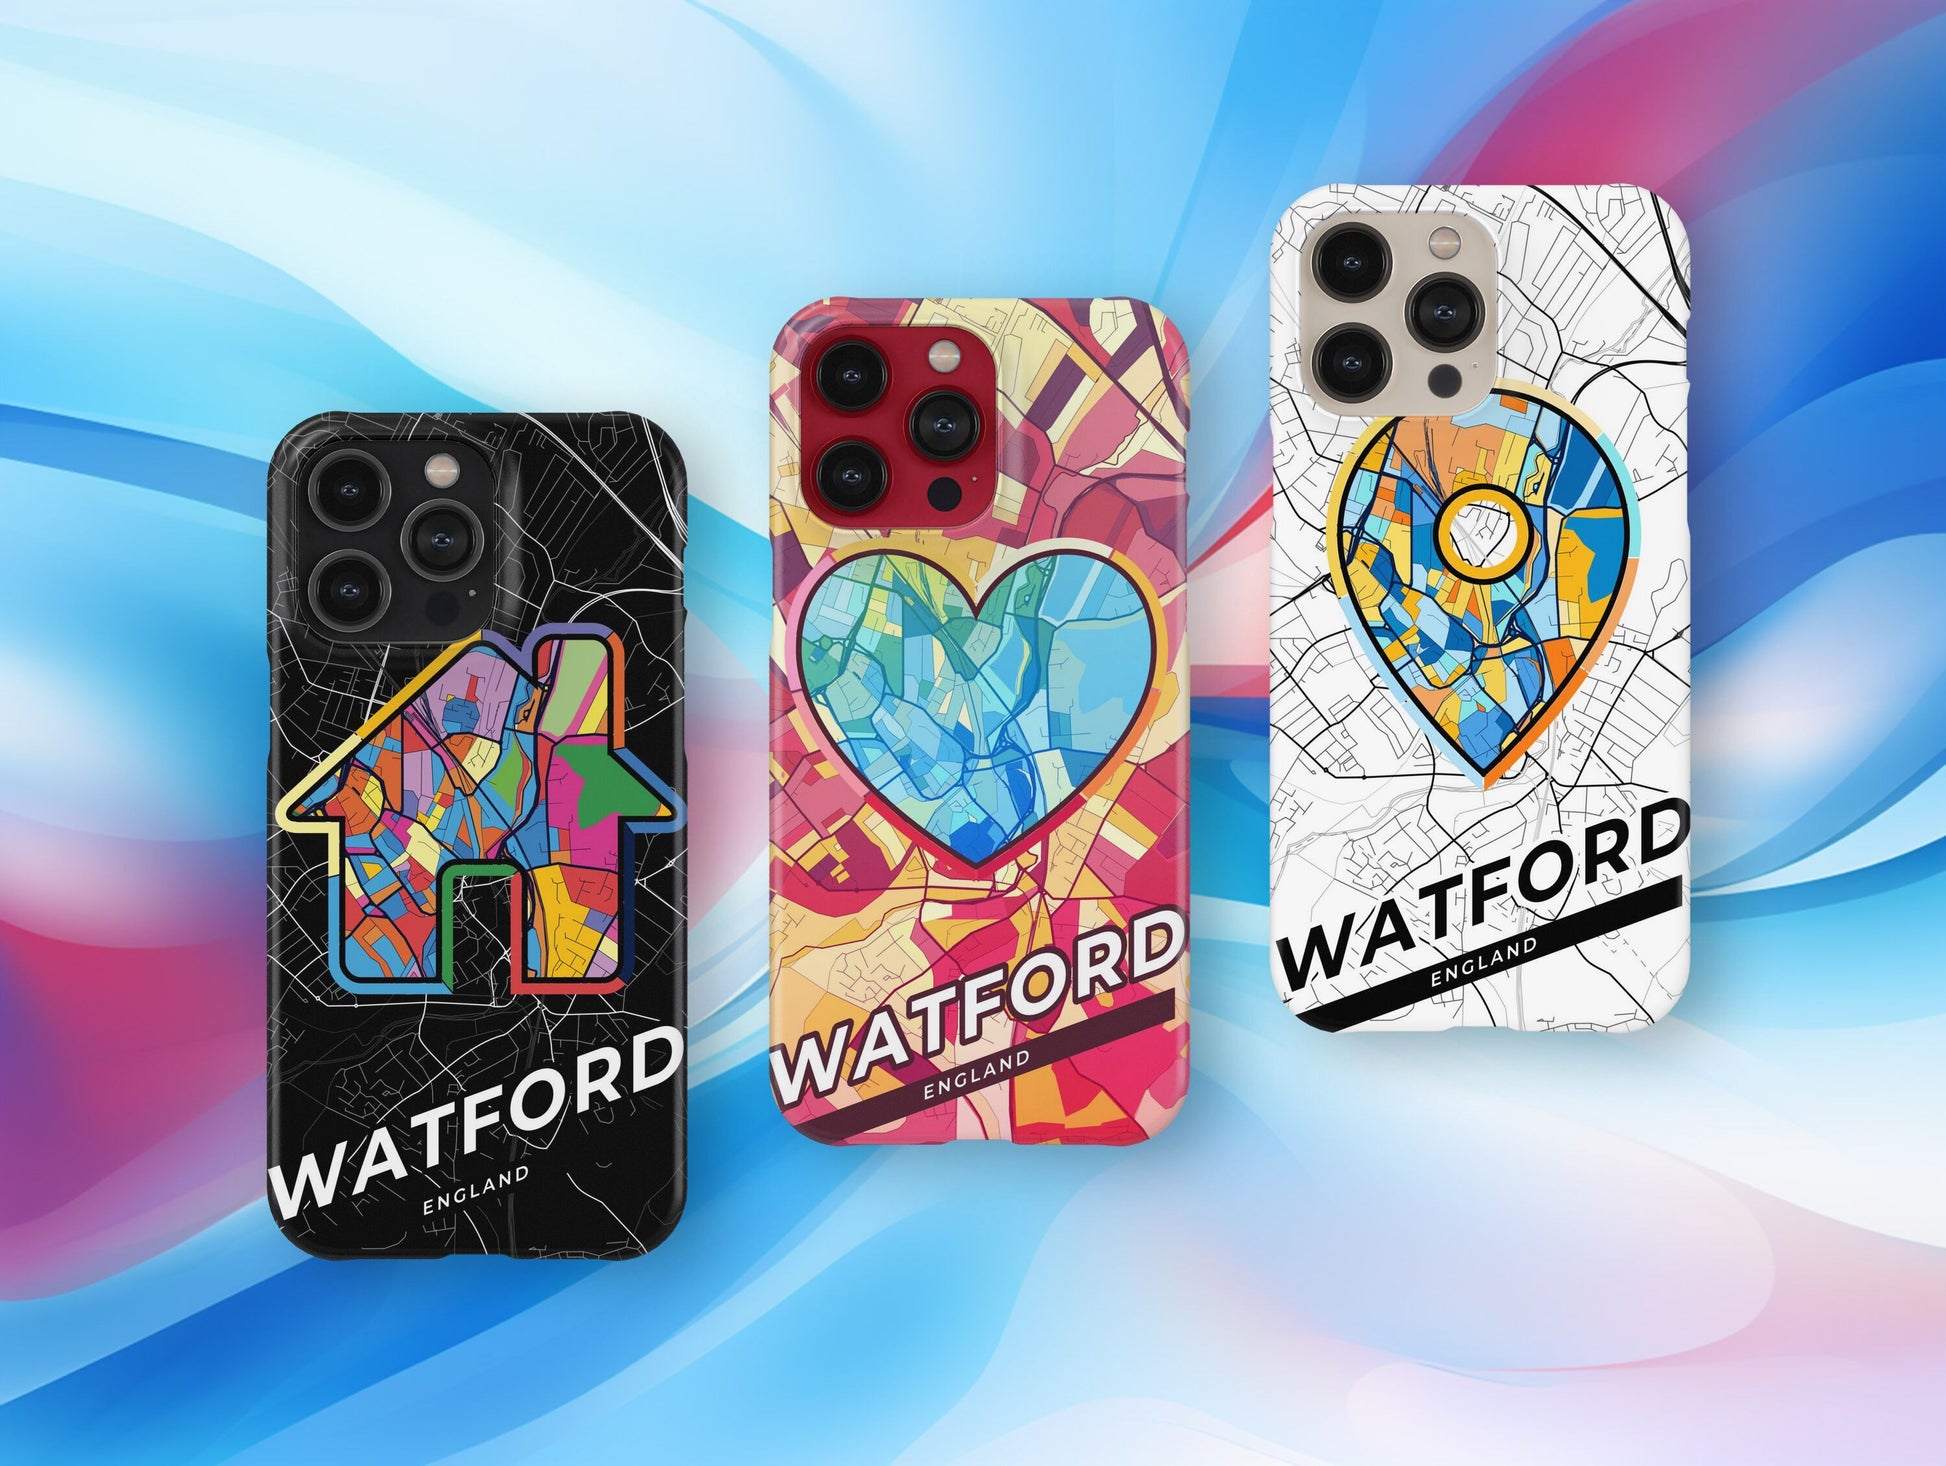 Watford England slim phone case with colorful icon